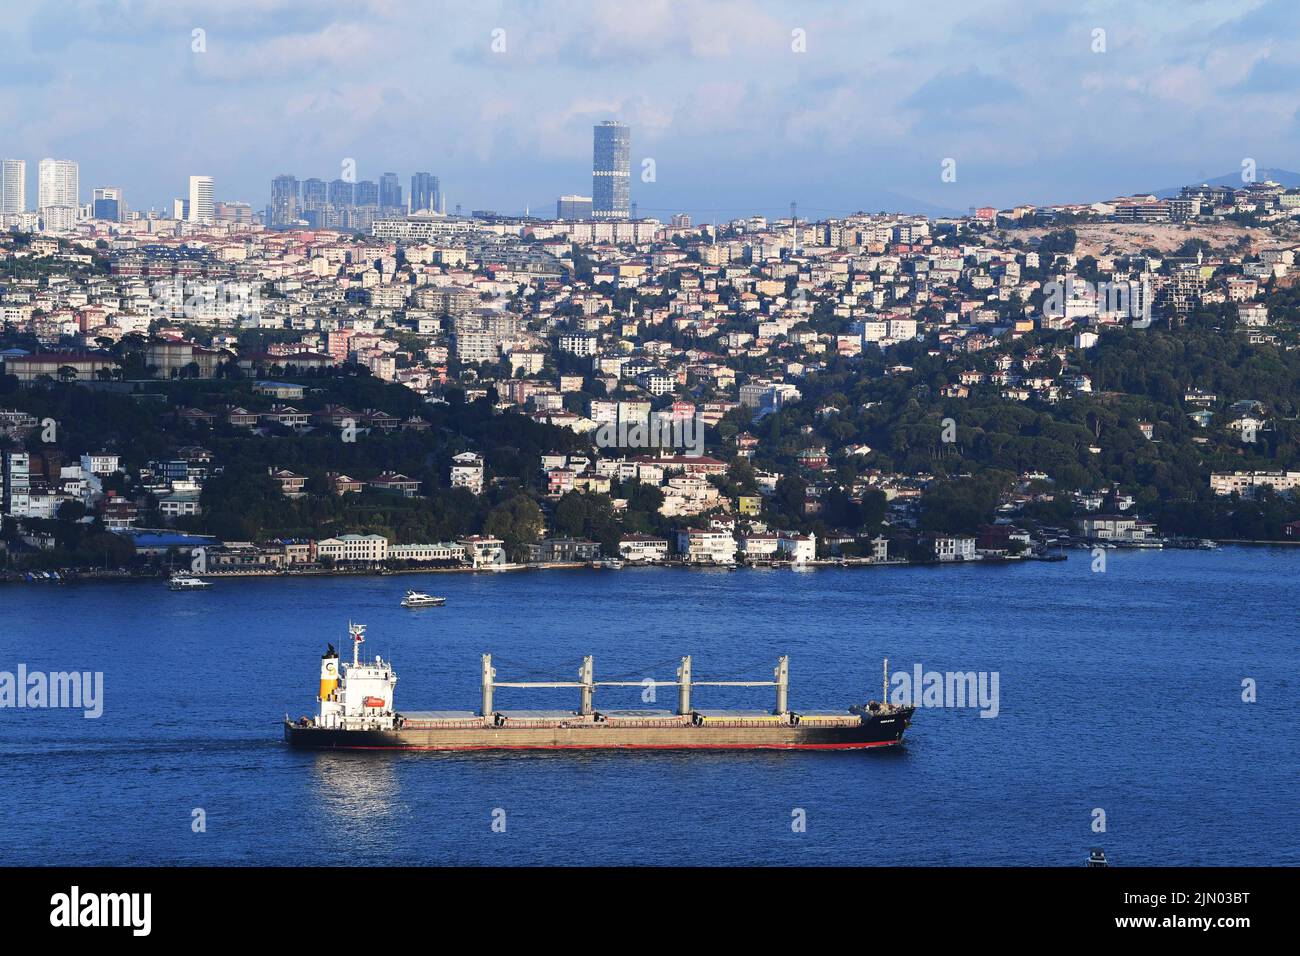 Istanbul, T¨¹rkiye. 7th Aug, 2022. A vessel in the second caravan of ships transporting grain from Ukraine passes through the Bosphorus Strait in Istanbul, T¨¹rkiye, Aug. 7, 2022. Efforts to bring Ukrainian grain to international markets via the Black Sea have gone into a higher gear as the inspections of the second caravan of ships off Istanbul were concluded on Sunday. Credit: Shadati/Xinhua/Alamy Live News Stock Photo